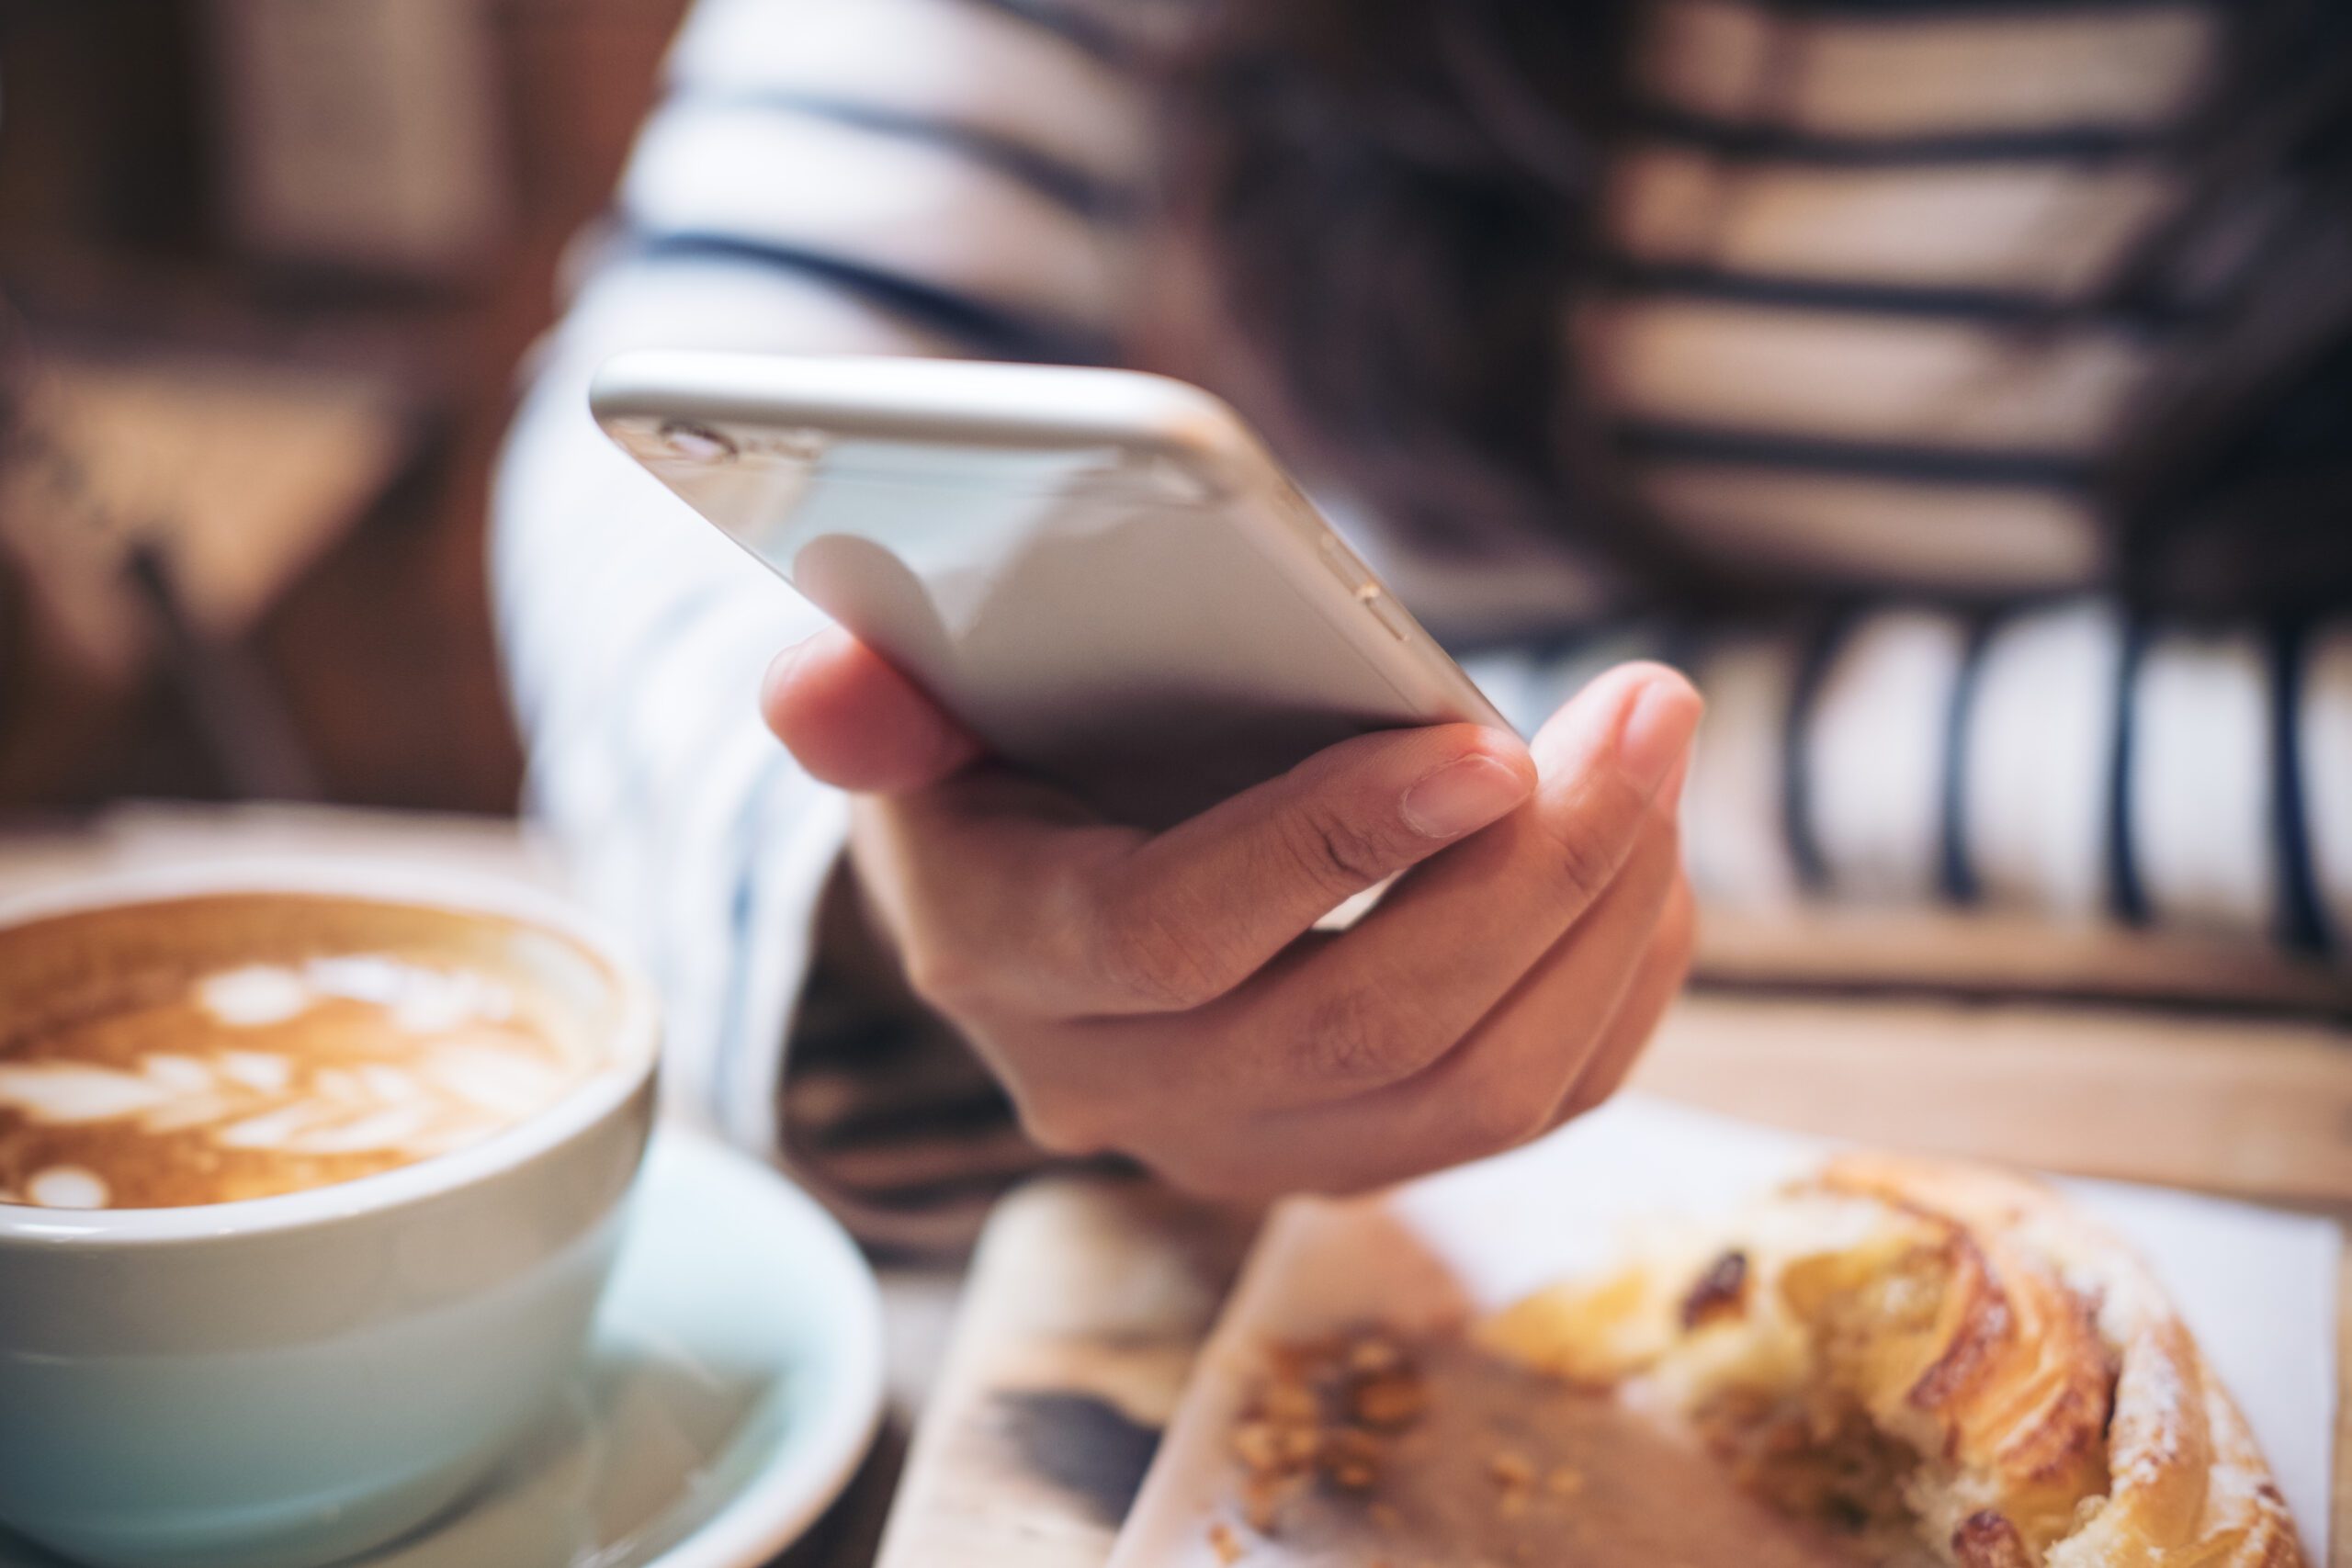 Closeup image of a woman's hands holding and using smart phone with latte coffee cup and bread on wooden table in vintage cafe